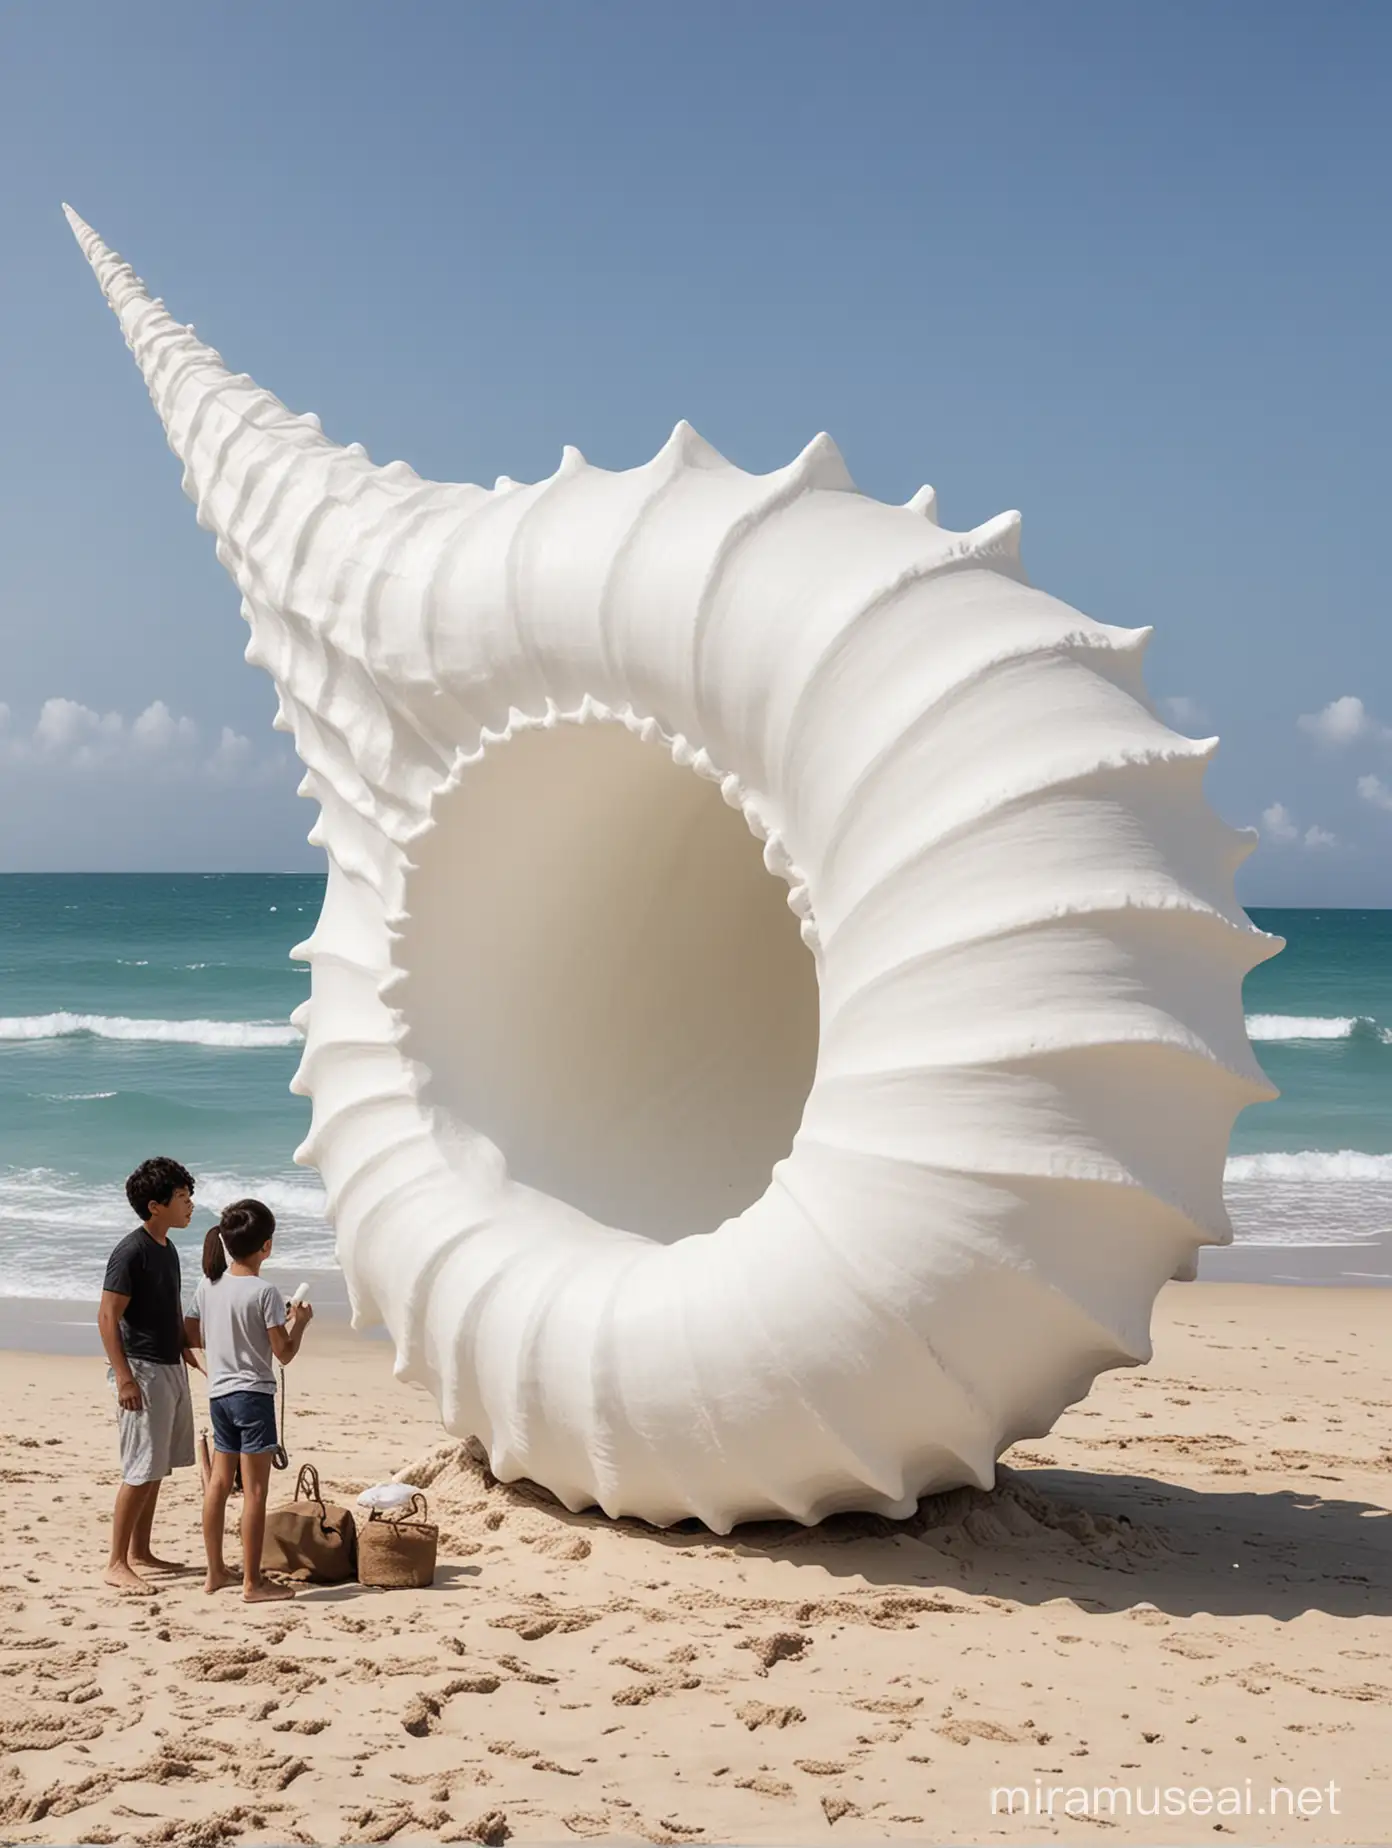 generate a huge white conch shell sculpture. Position it on a clean beach. Have some people standing next to it for size reference. Have it be about 2 meters tall.